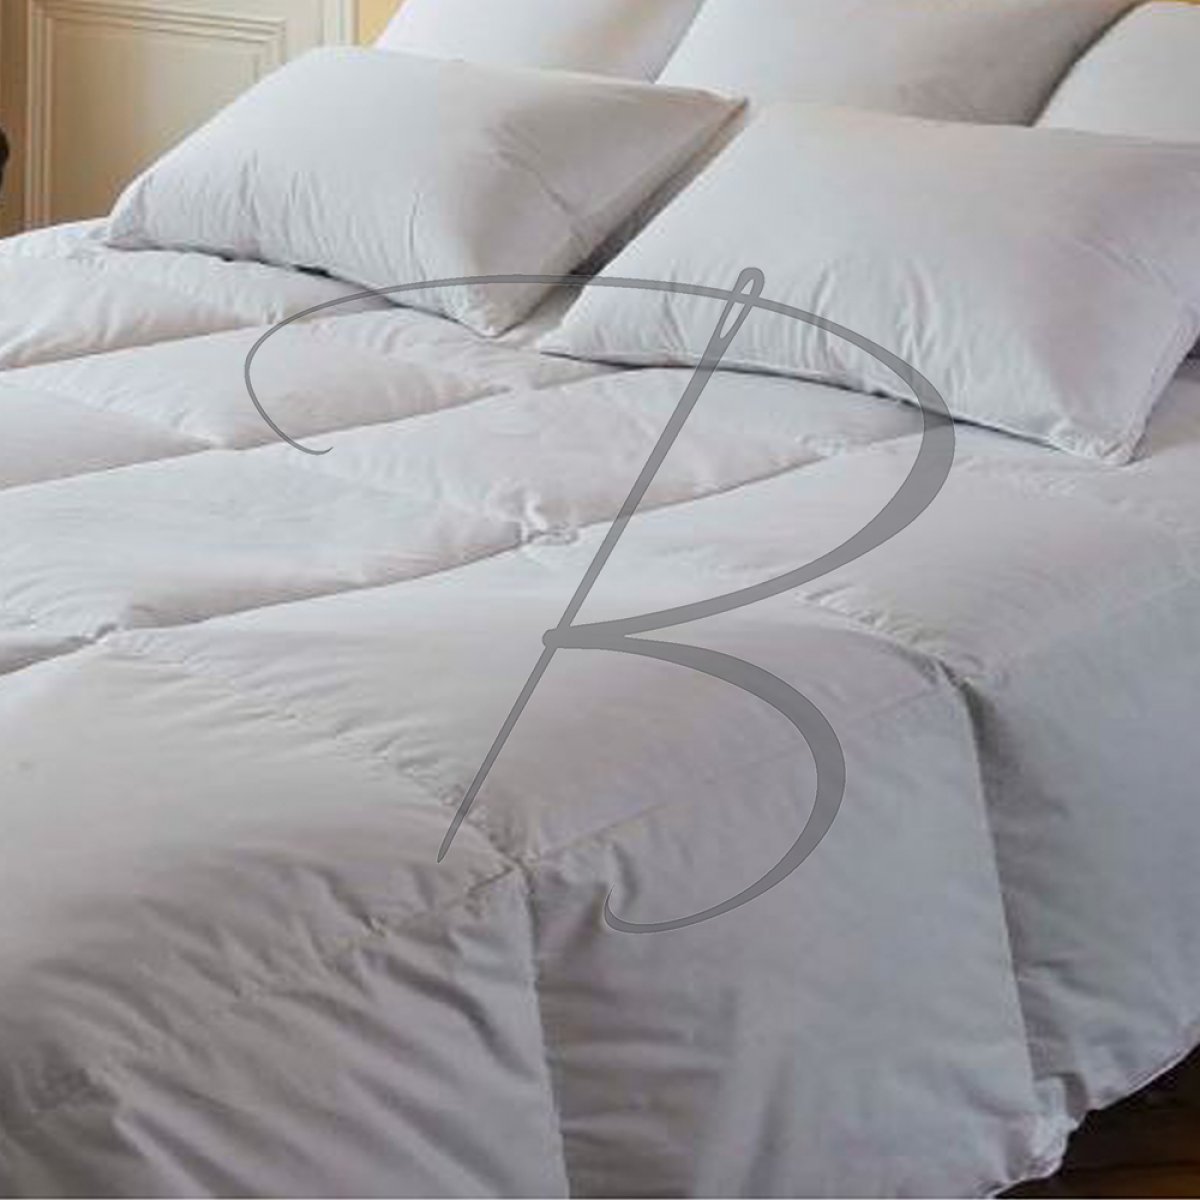 Synthetic comforter EVEREST - 400g/m² - 200 x 200